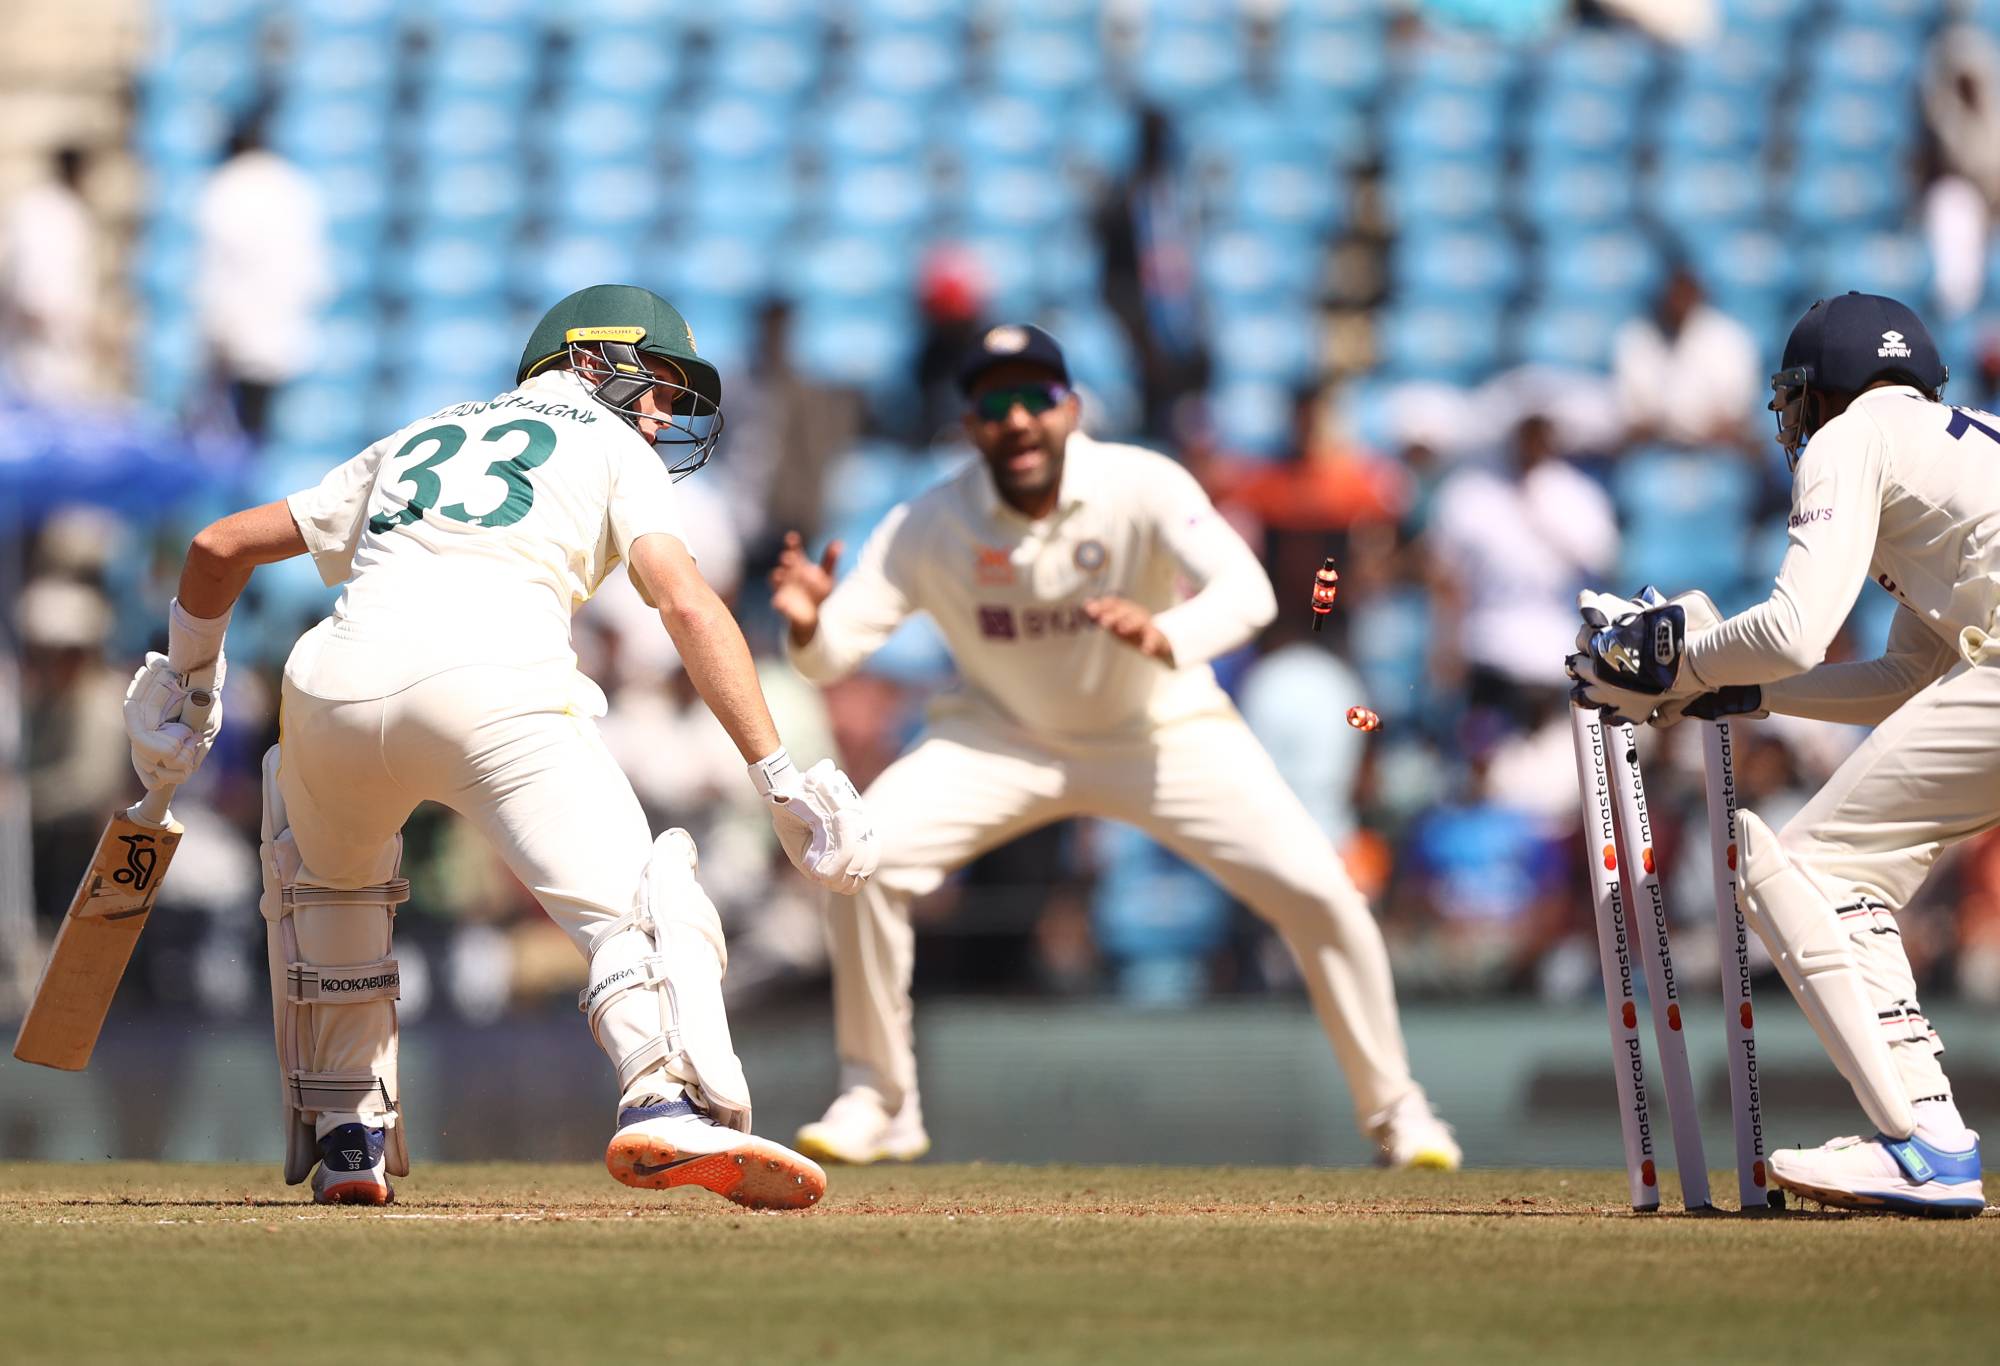 NAGPUR, INDIA - FEBRUARY 09: KS Bharat of India stumps Marnus Labuschagne of Australia during day one of the First Test match in the series between India and Australia at Vidarbha Cricket Association Ground on February 09, 2023 in Nagpur, India. (Photo by Robert Cianflone/Getty Images)